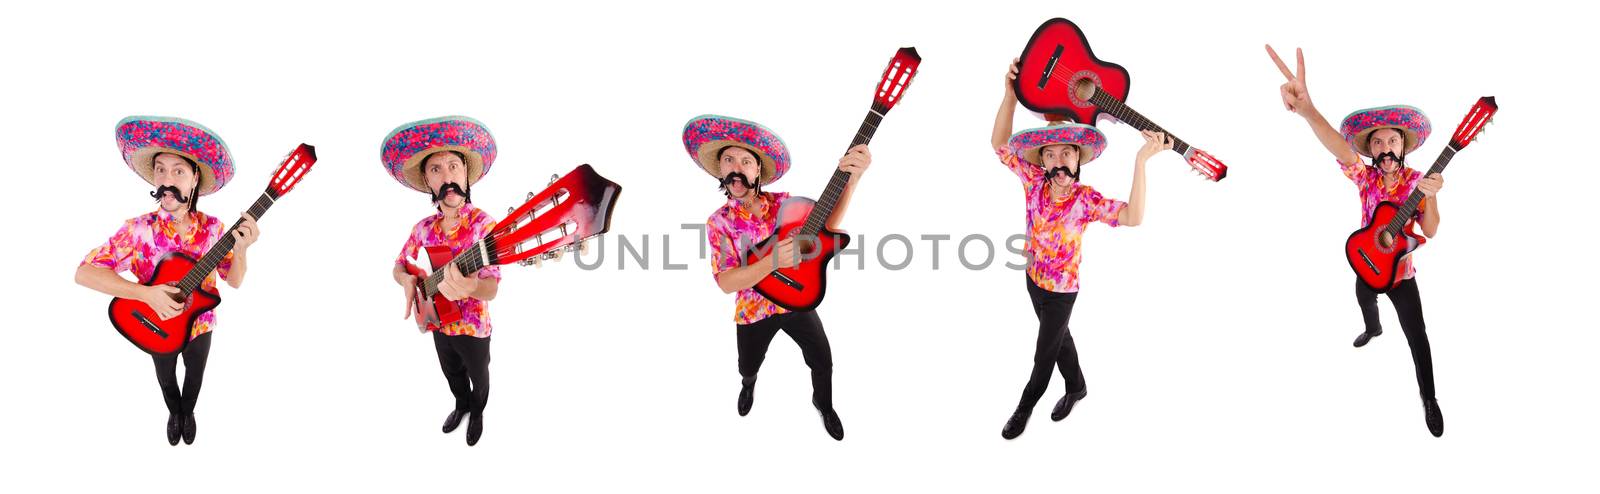 Mexican guitar player isolated on the white